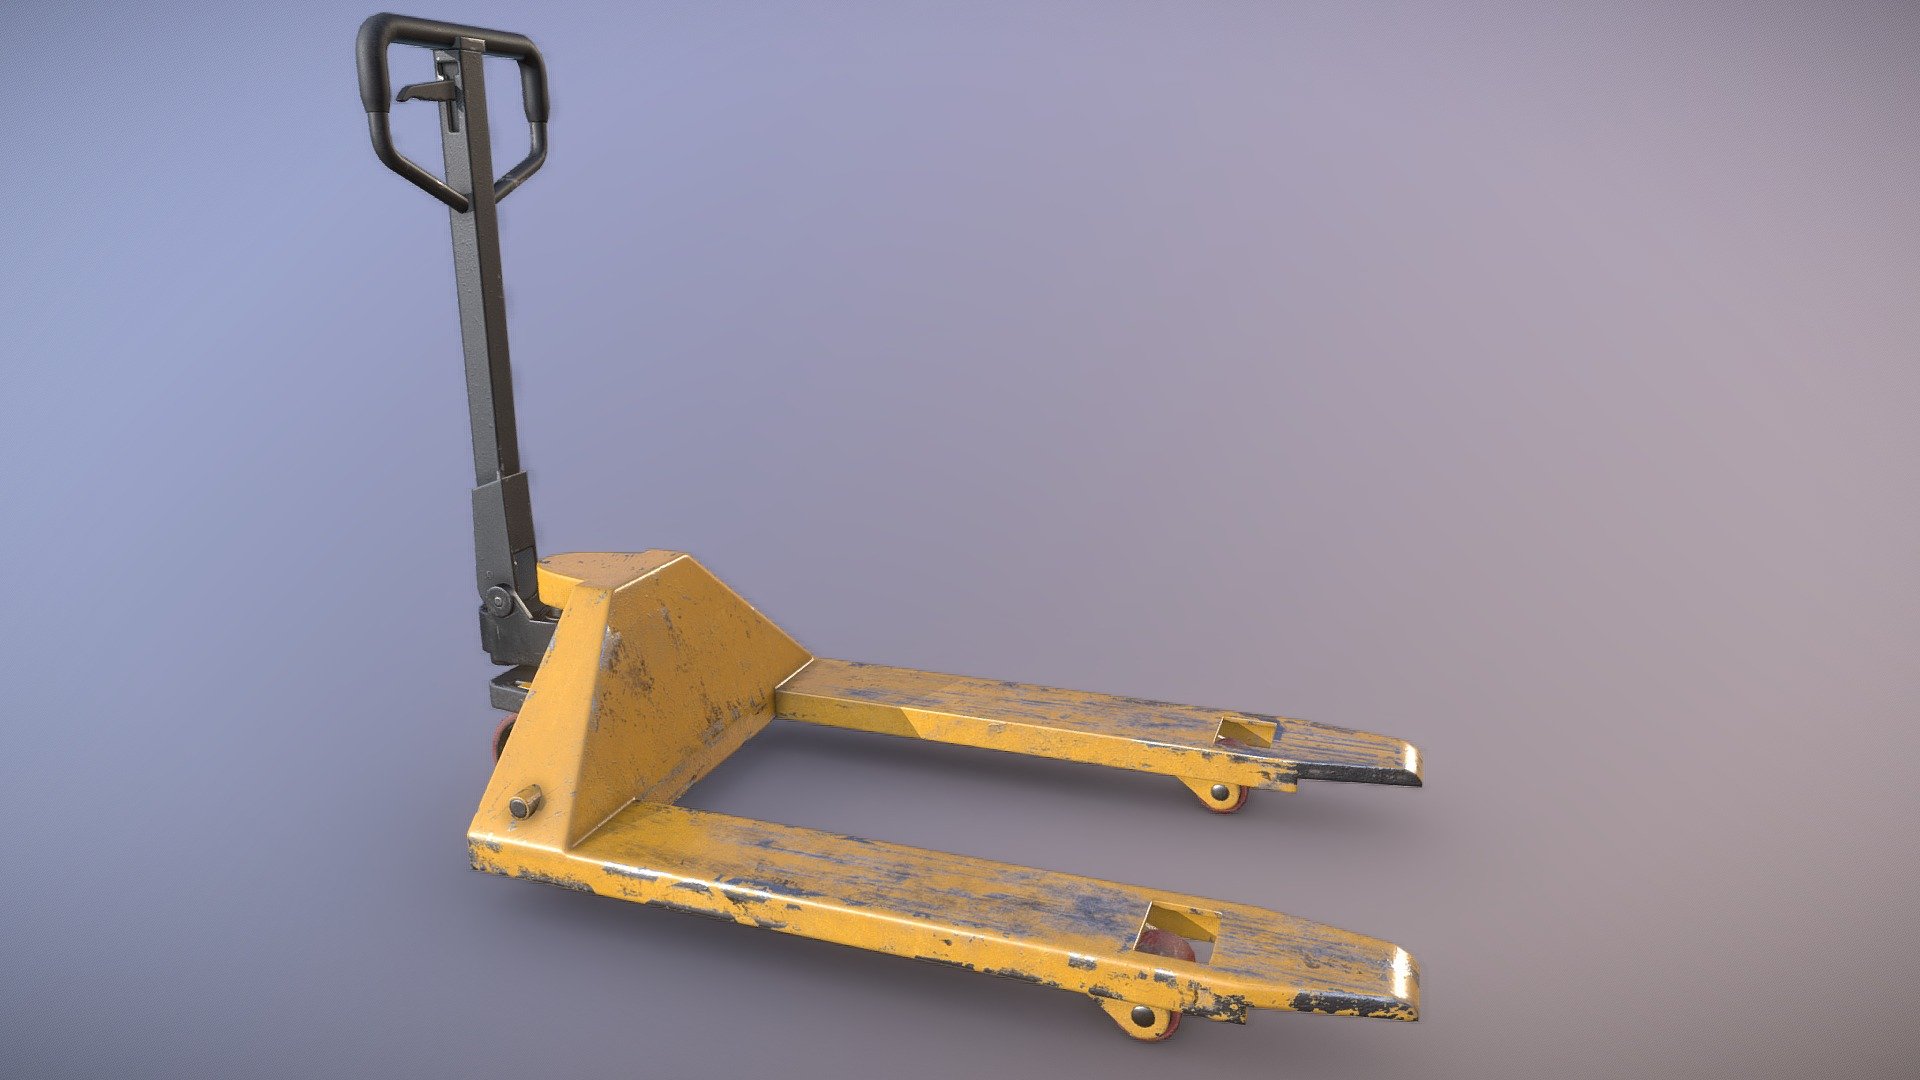 Pallet Jack designed for PBR engines.

Originally modeled in 3ds Max 2019. Download includes .max, .fbx, .obj, metal/roughness PBR textures, textures for Unity and Unreal Engines, and additional texture maps such as curvature, AO, and color ID.

Specs


Scaled to approximate real world size (centimeters)
Mesh is in tris and quads, no n-gons.

Textures

1 Material: 2048x2048 Base Color, Roughness, Metallic, Normal, AO

Unity Engine 5 Textures: AlbedoTransparency, MetallicSmoothness, Normal, Occlusion

Unreal Engine 4 Textures: BaseColor, Normal, RoughnessMetallicAO - Pallet Jack - Buy Royalty Free 3D model by Luchador (@Luchador90) 3d model